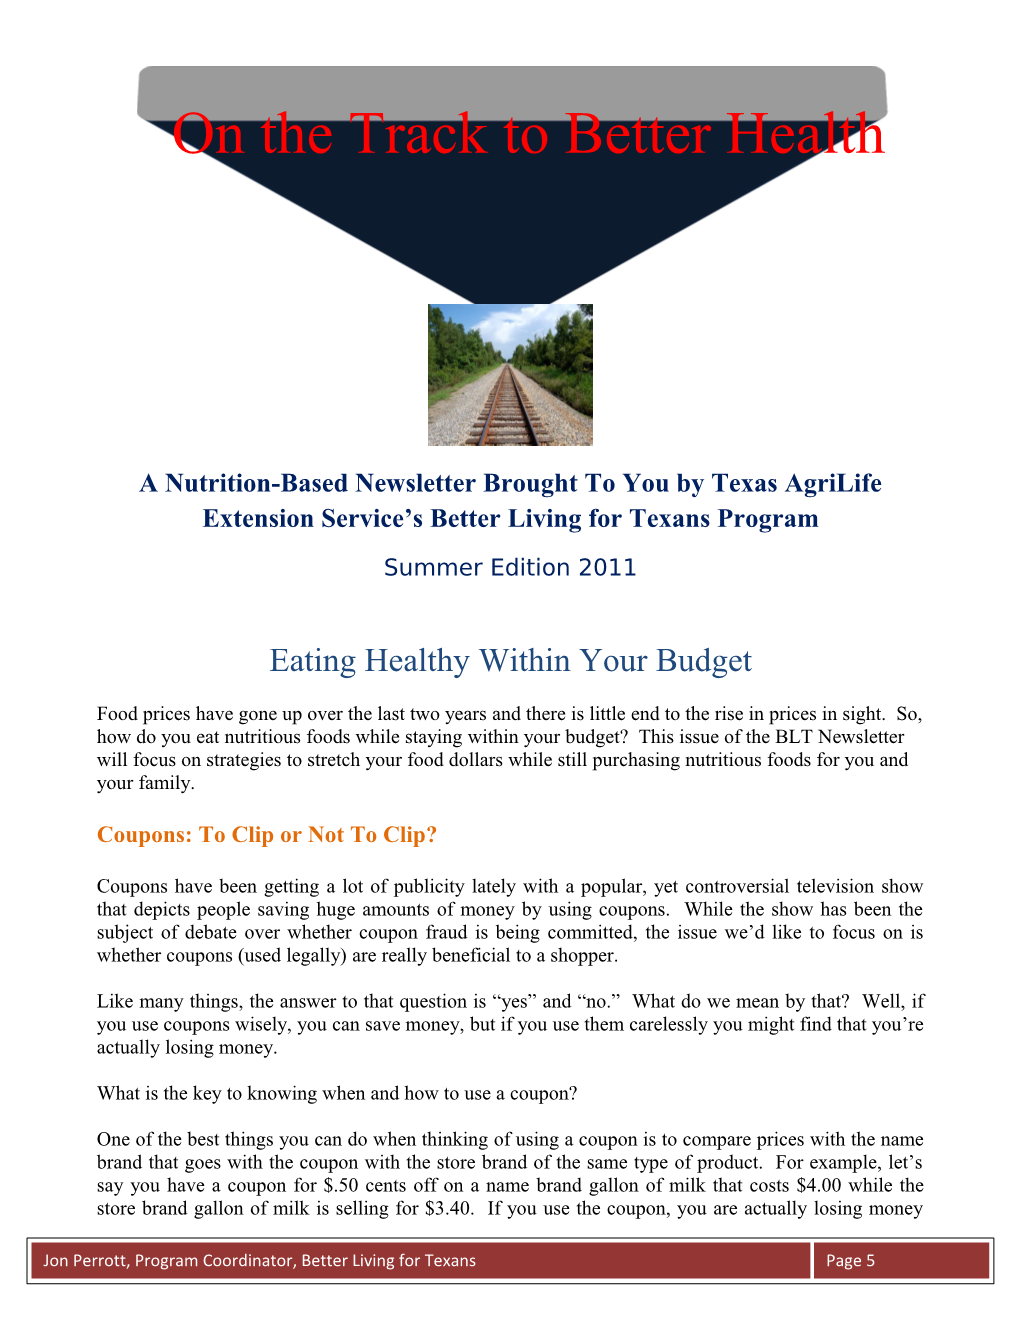 A Nutrition-Based Newsletter Brought to You by Texas Agrilife Extension Service S Better